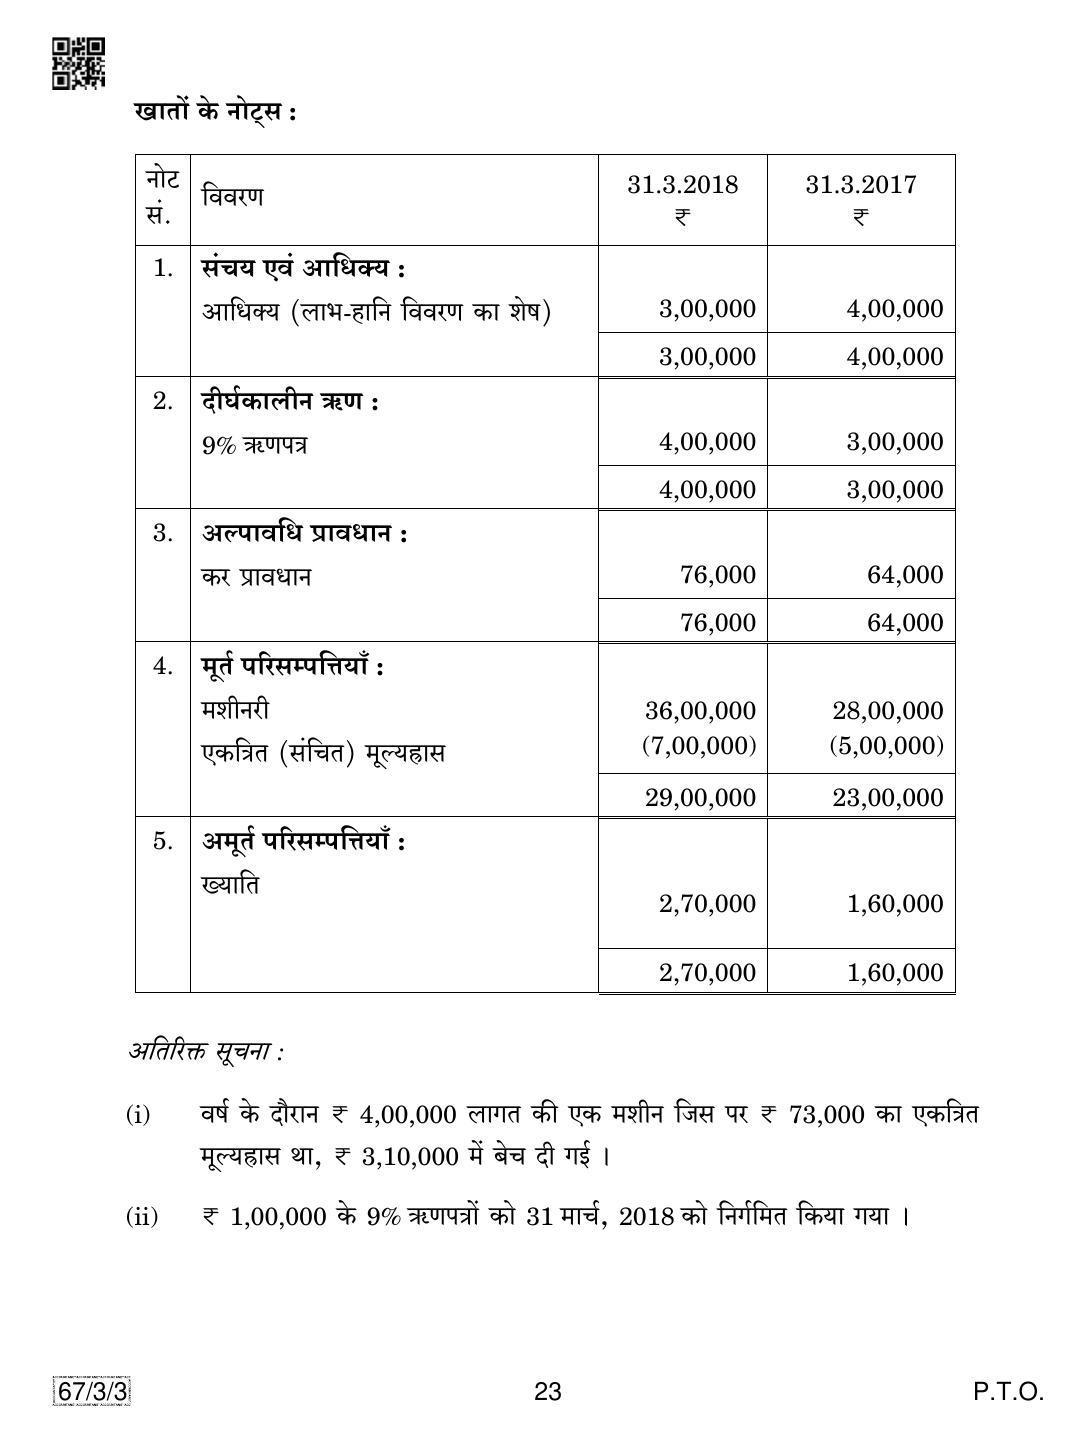 CBSE Class 12 67-3-3 Accountancy 2019 Question Paper - Page 23